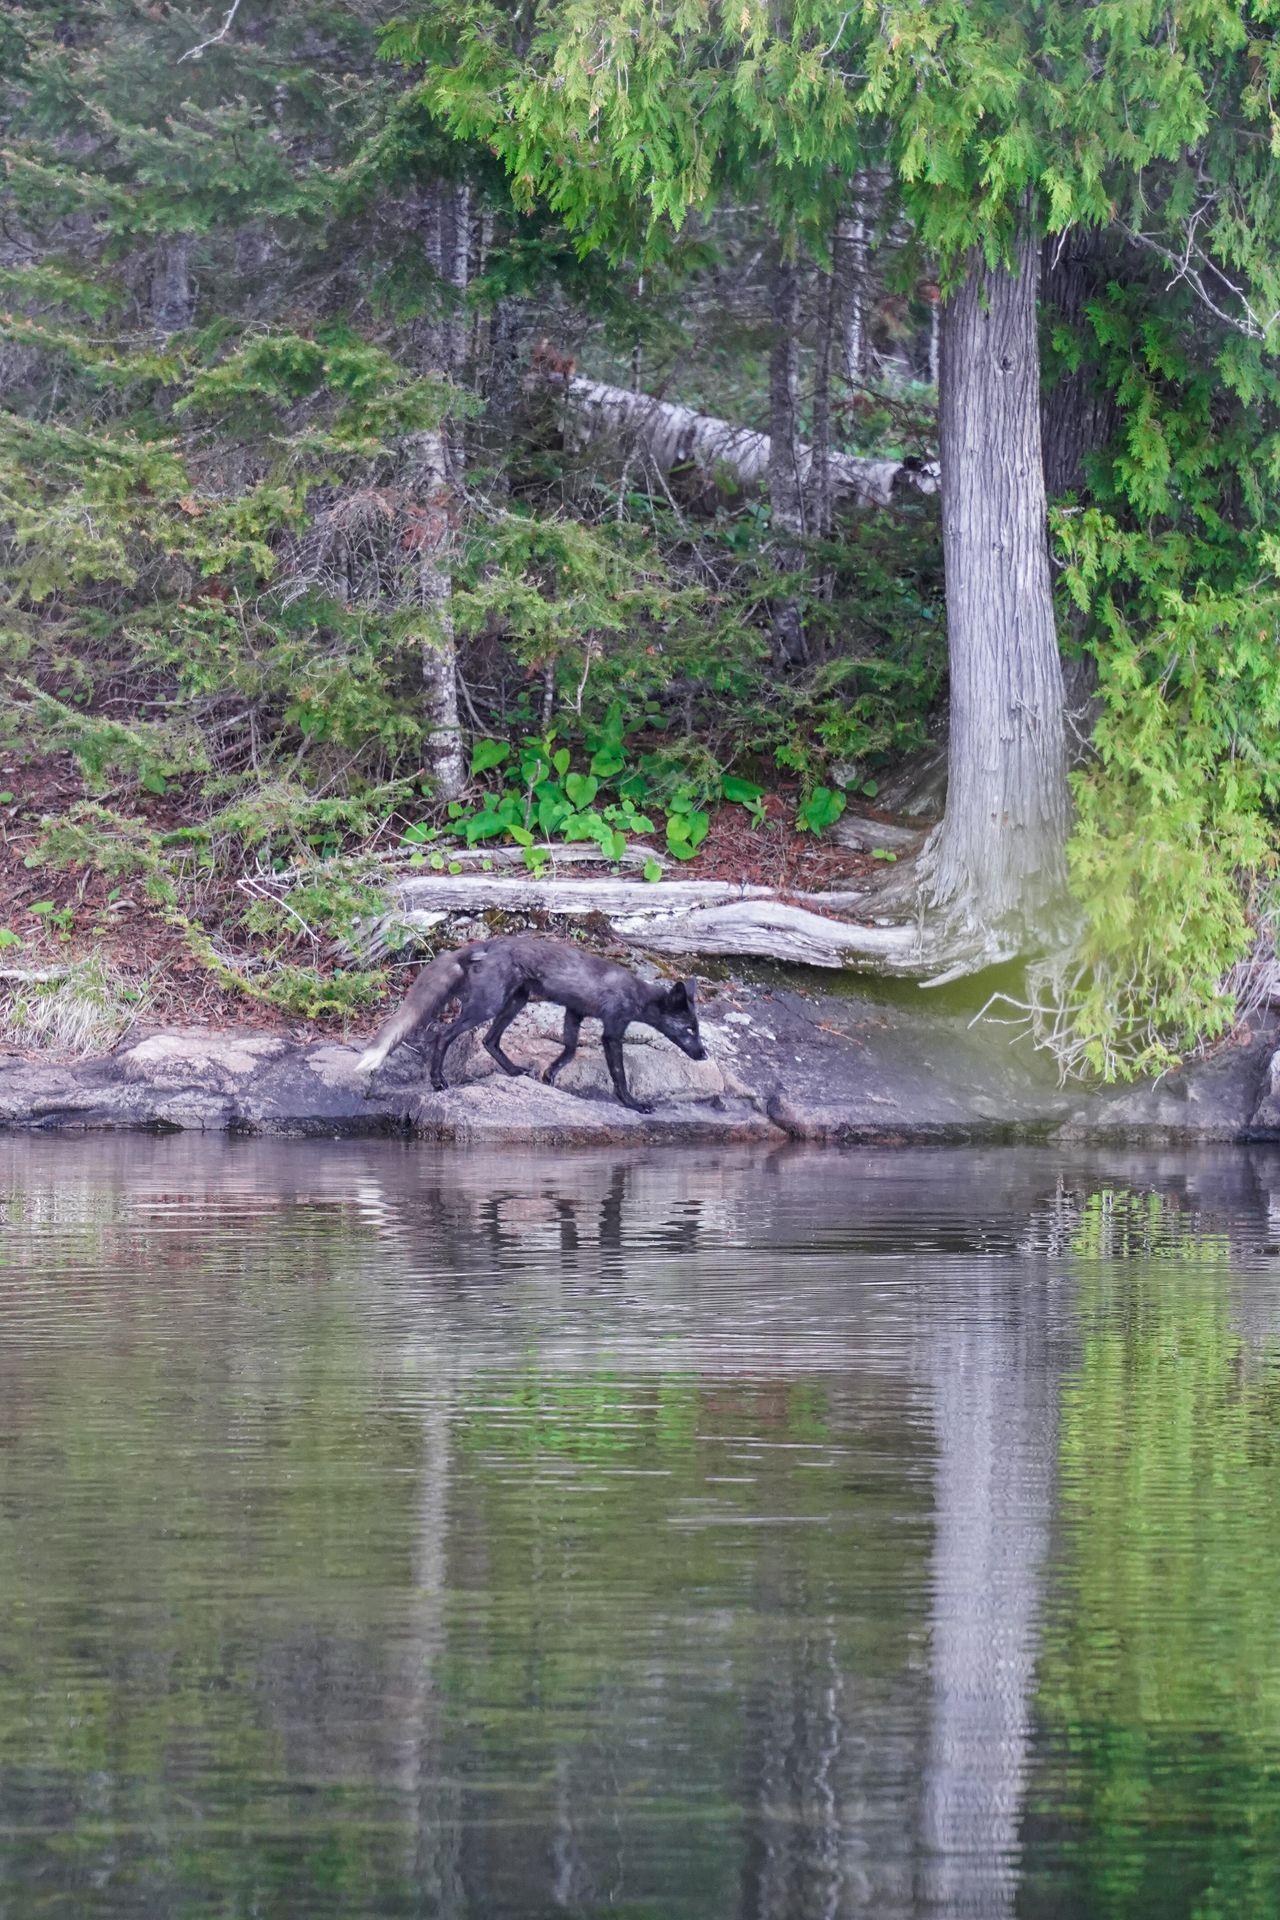 A black fox going to the lake to drink some water at the Moskey Basin campground.